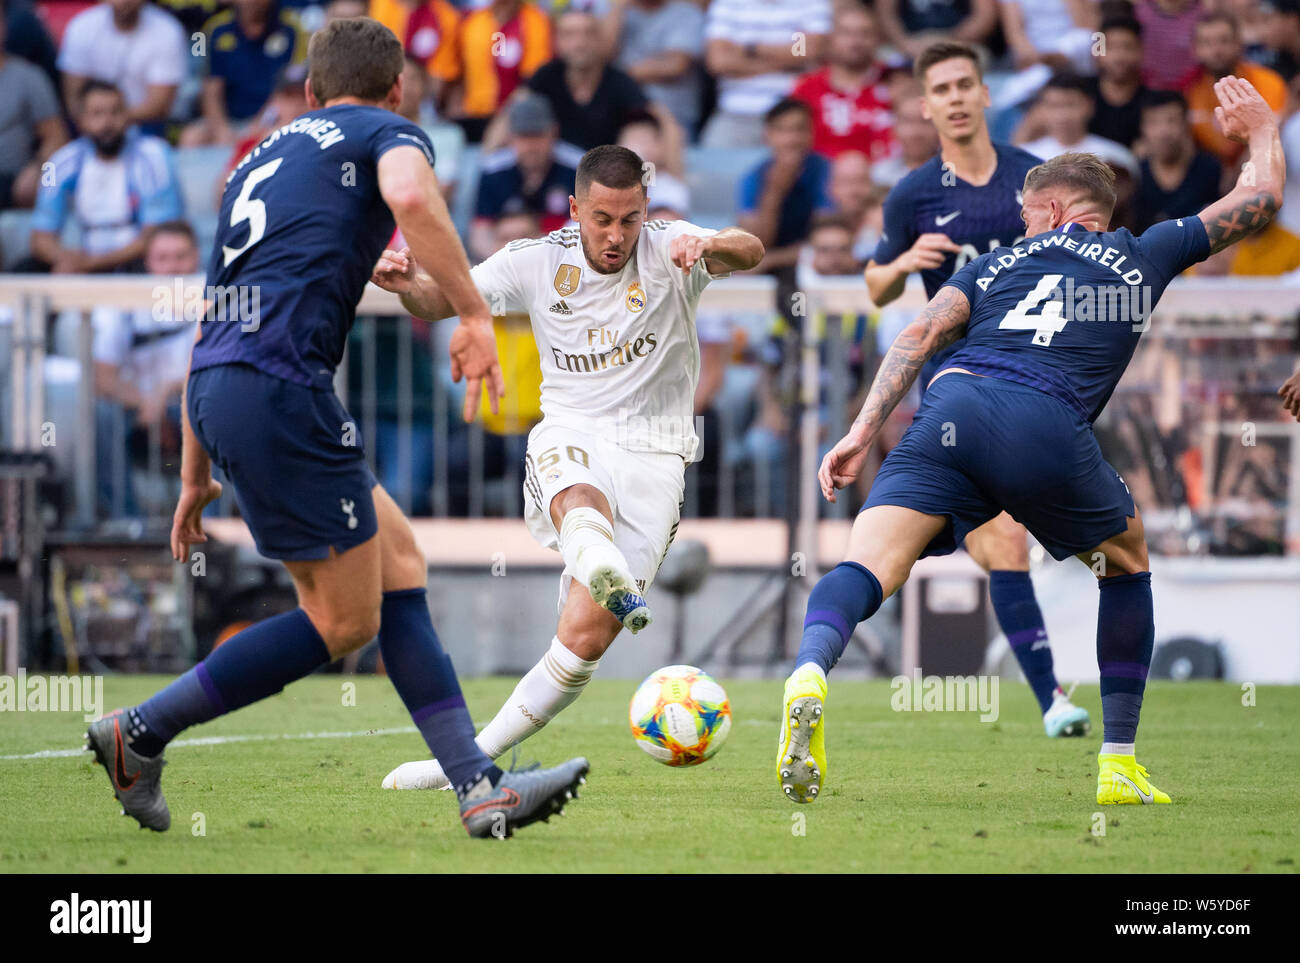 Munich, Germany. 30th July, 2019. Soccer: test matches, Audi Cup in the Allianz Arena, semi-final: Real Madrid - Tottenham Hotspur. Madrid's Eden Hazard (M) is battling for the ball with Jan Vertonghen (l) and Toby Alderweireld of Tottenham. Credit: Sven Hoppe/dpa/Alamy Live News Stock Photo